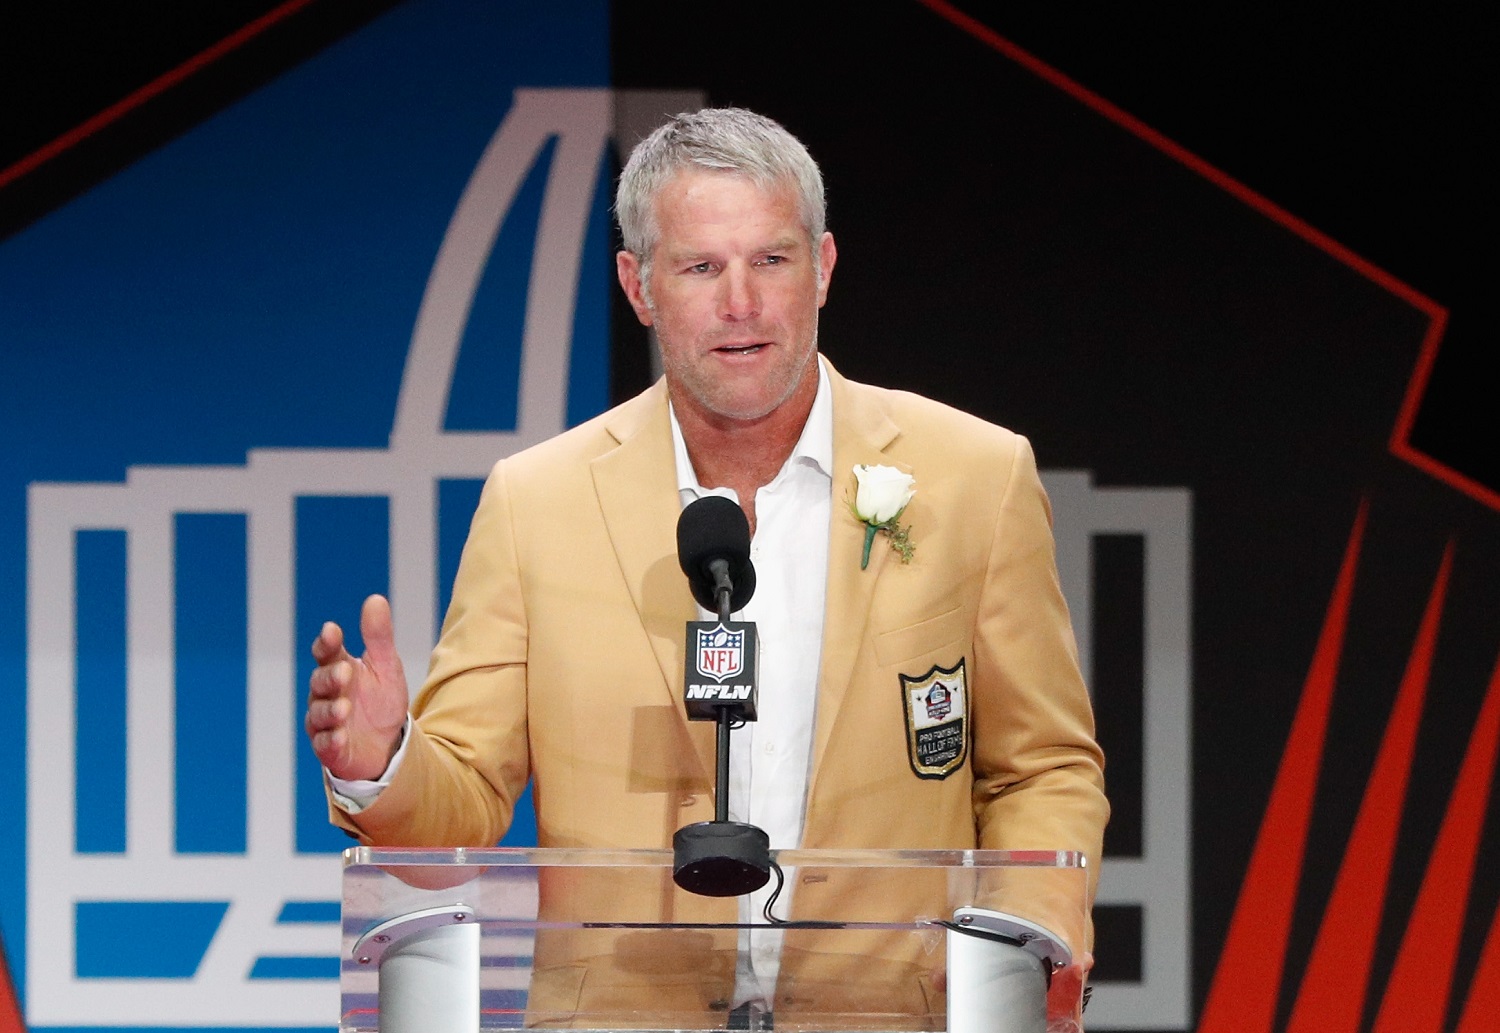 Green Bay Packers legend Brett Favre was inducted into the Pro Football Hall of Fame in 2016.